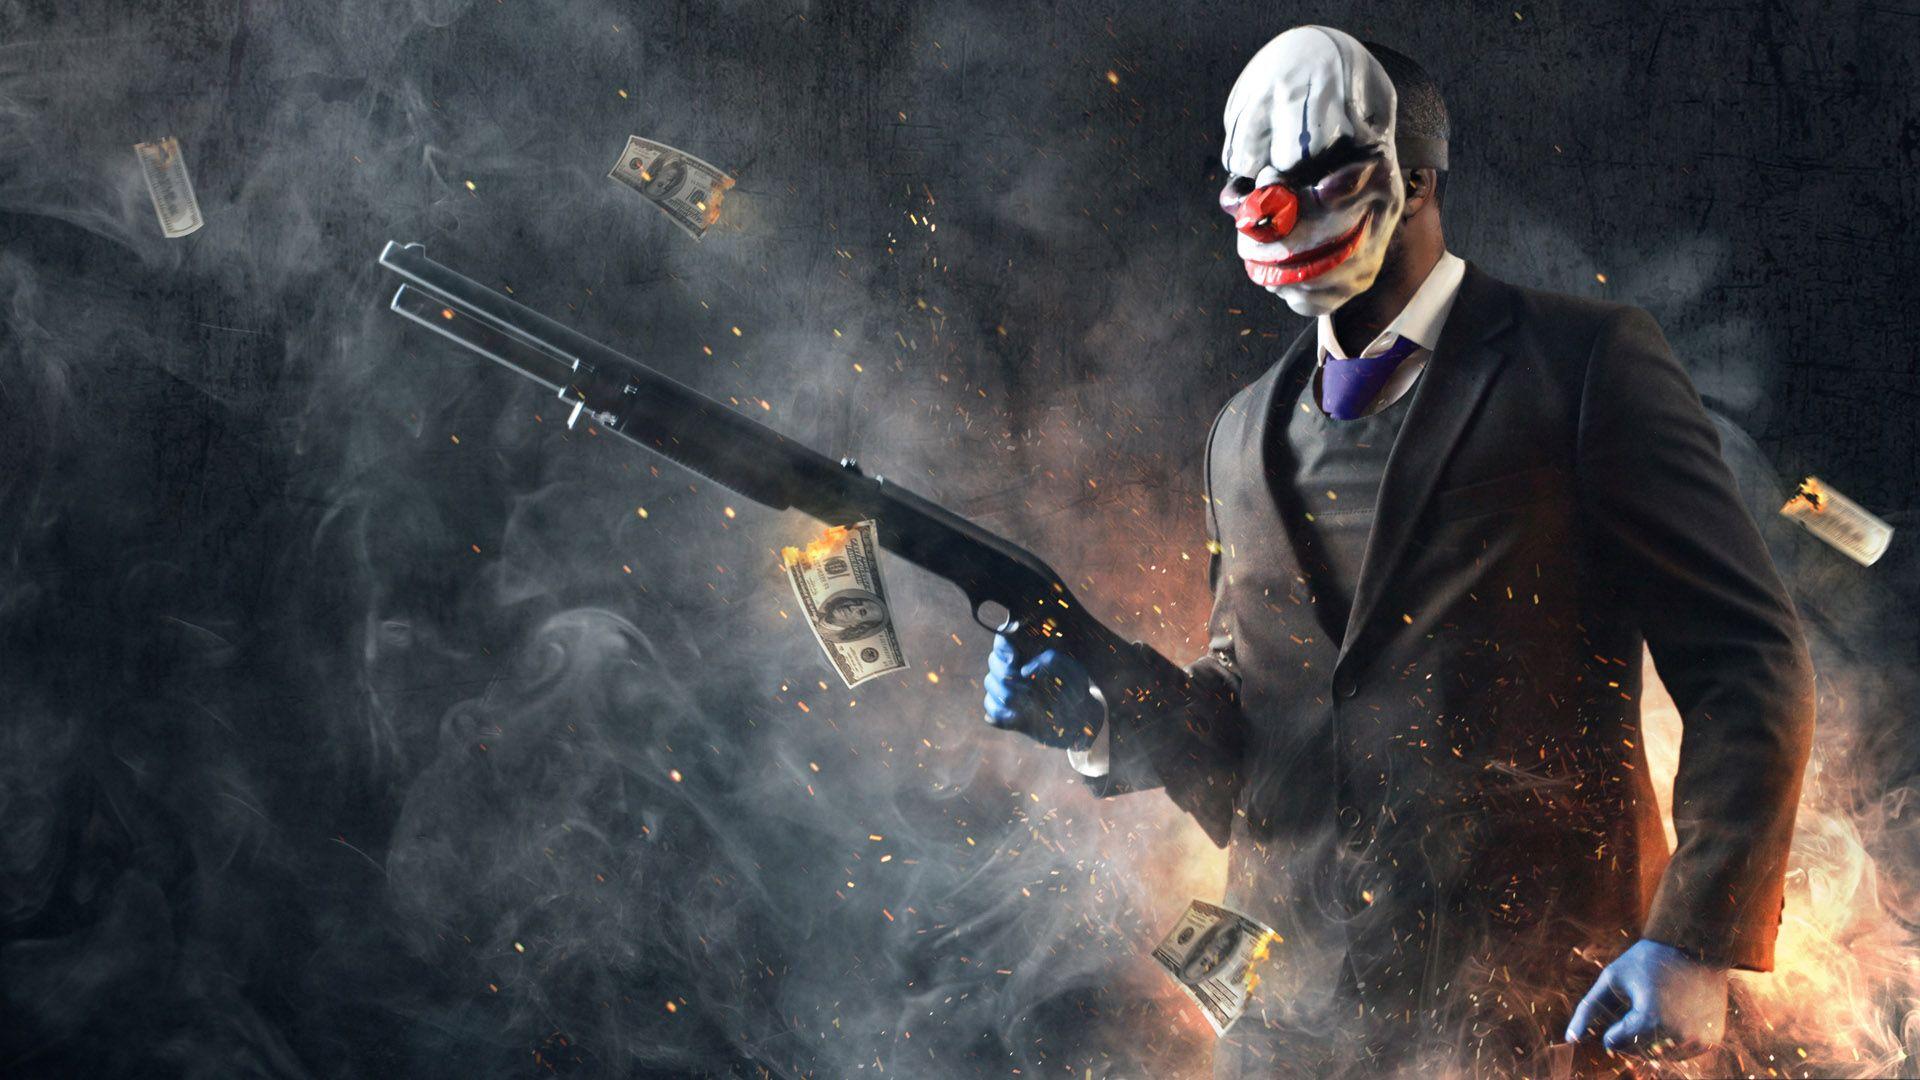 payday 2 switch download